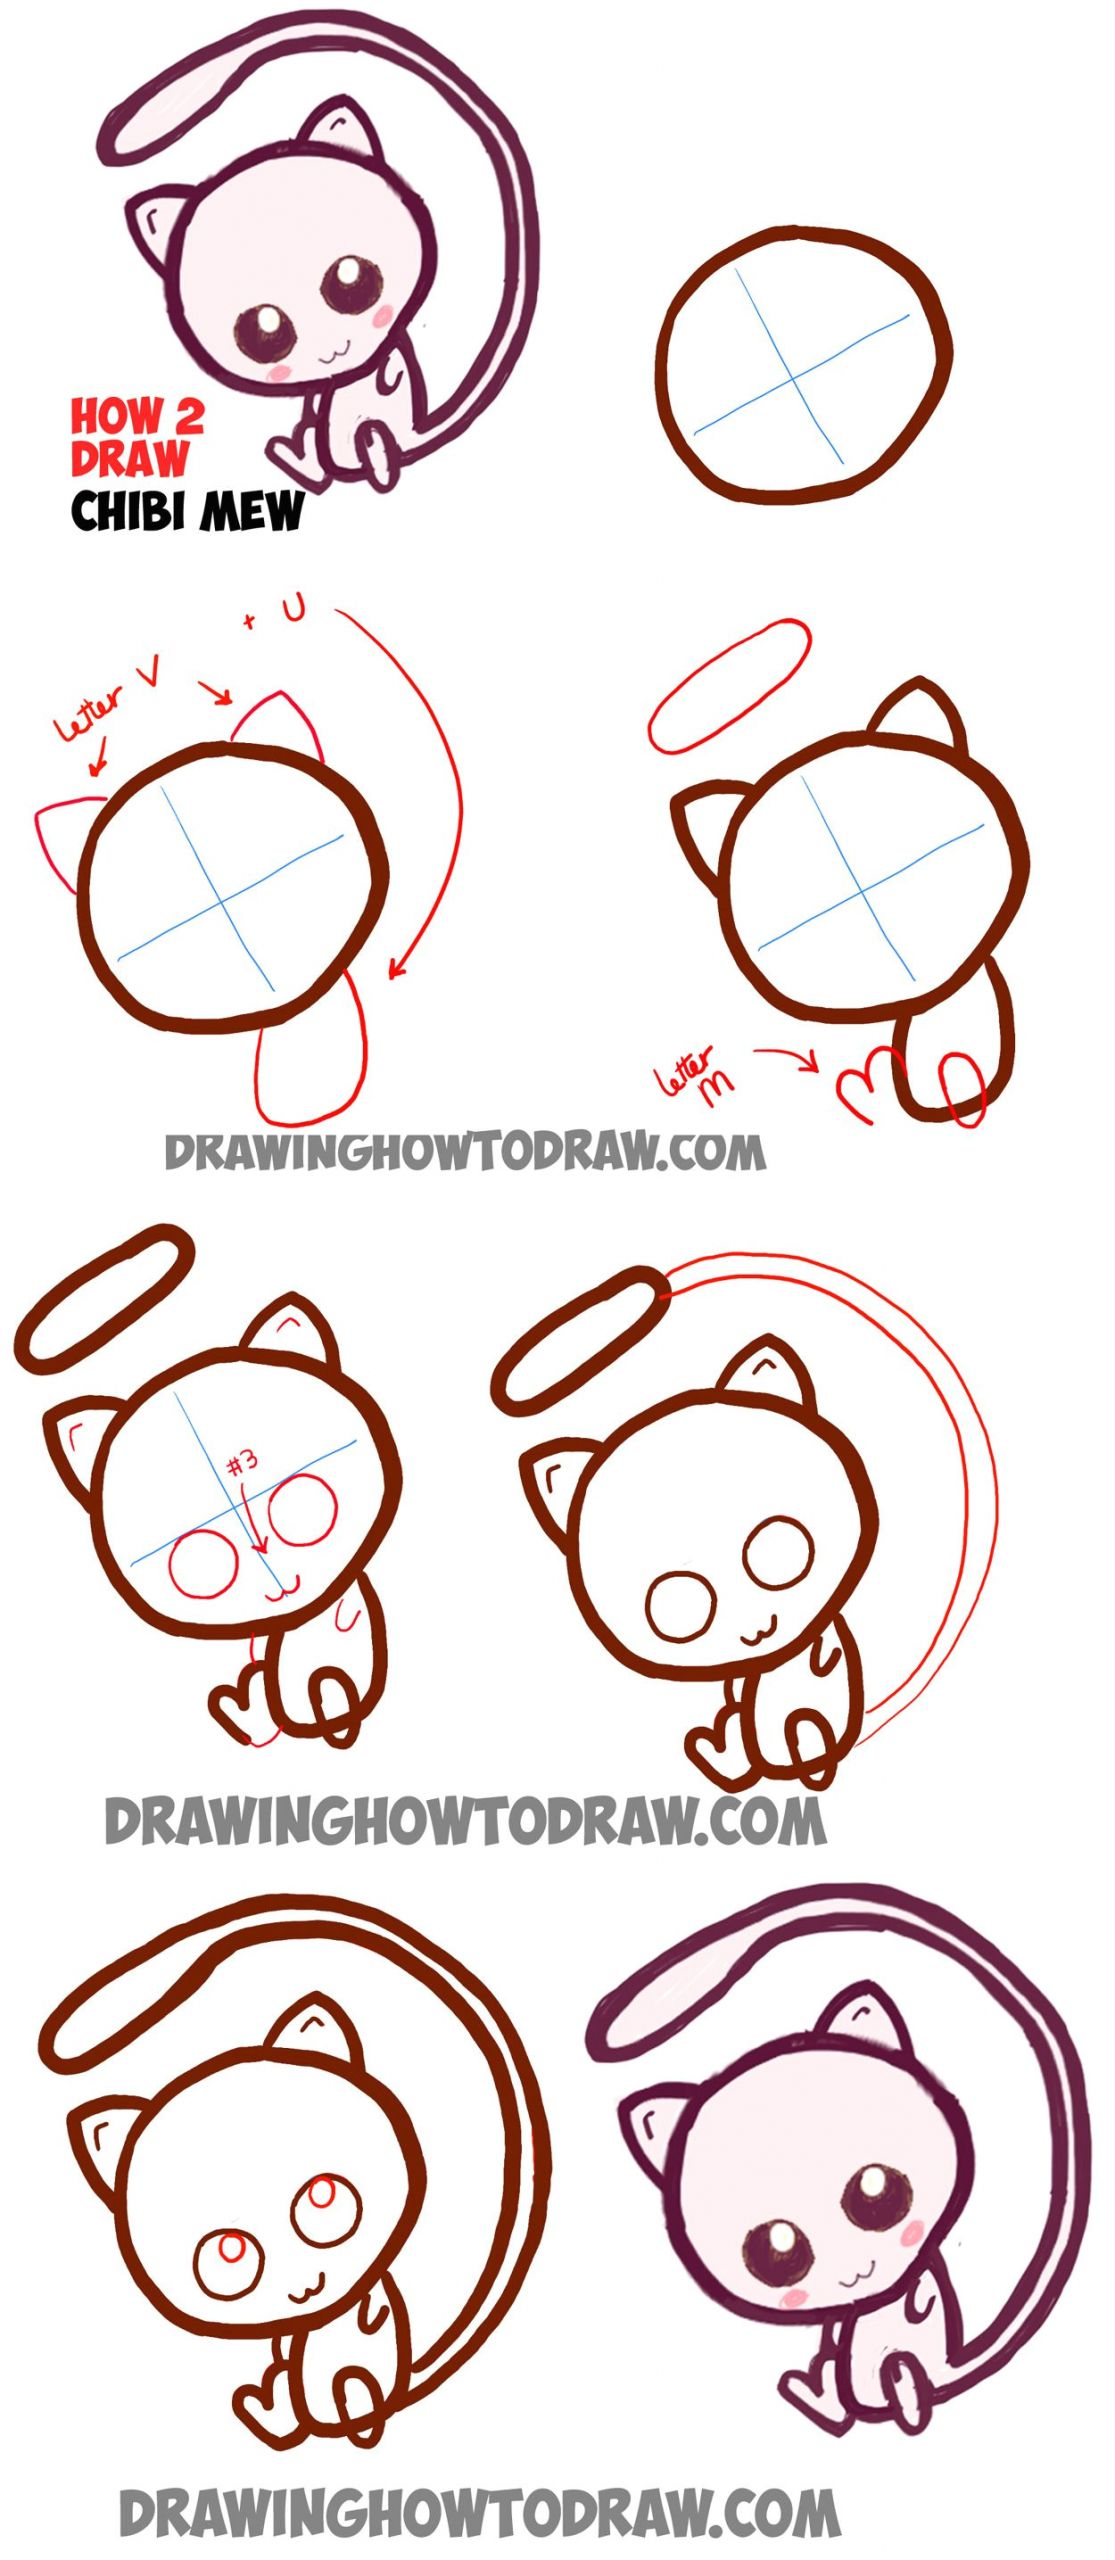 How to Draw A Easy Baby How to Draw Cute Baby Chibi Mew From Pokemon Easy Step by